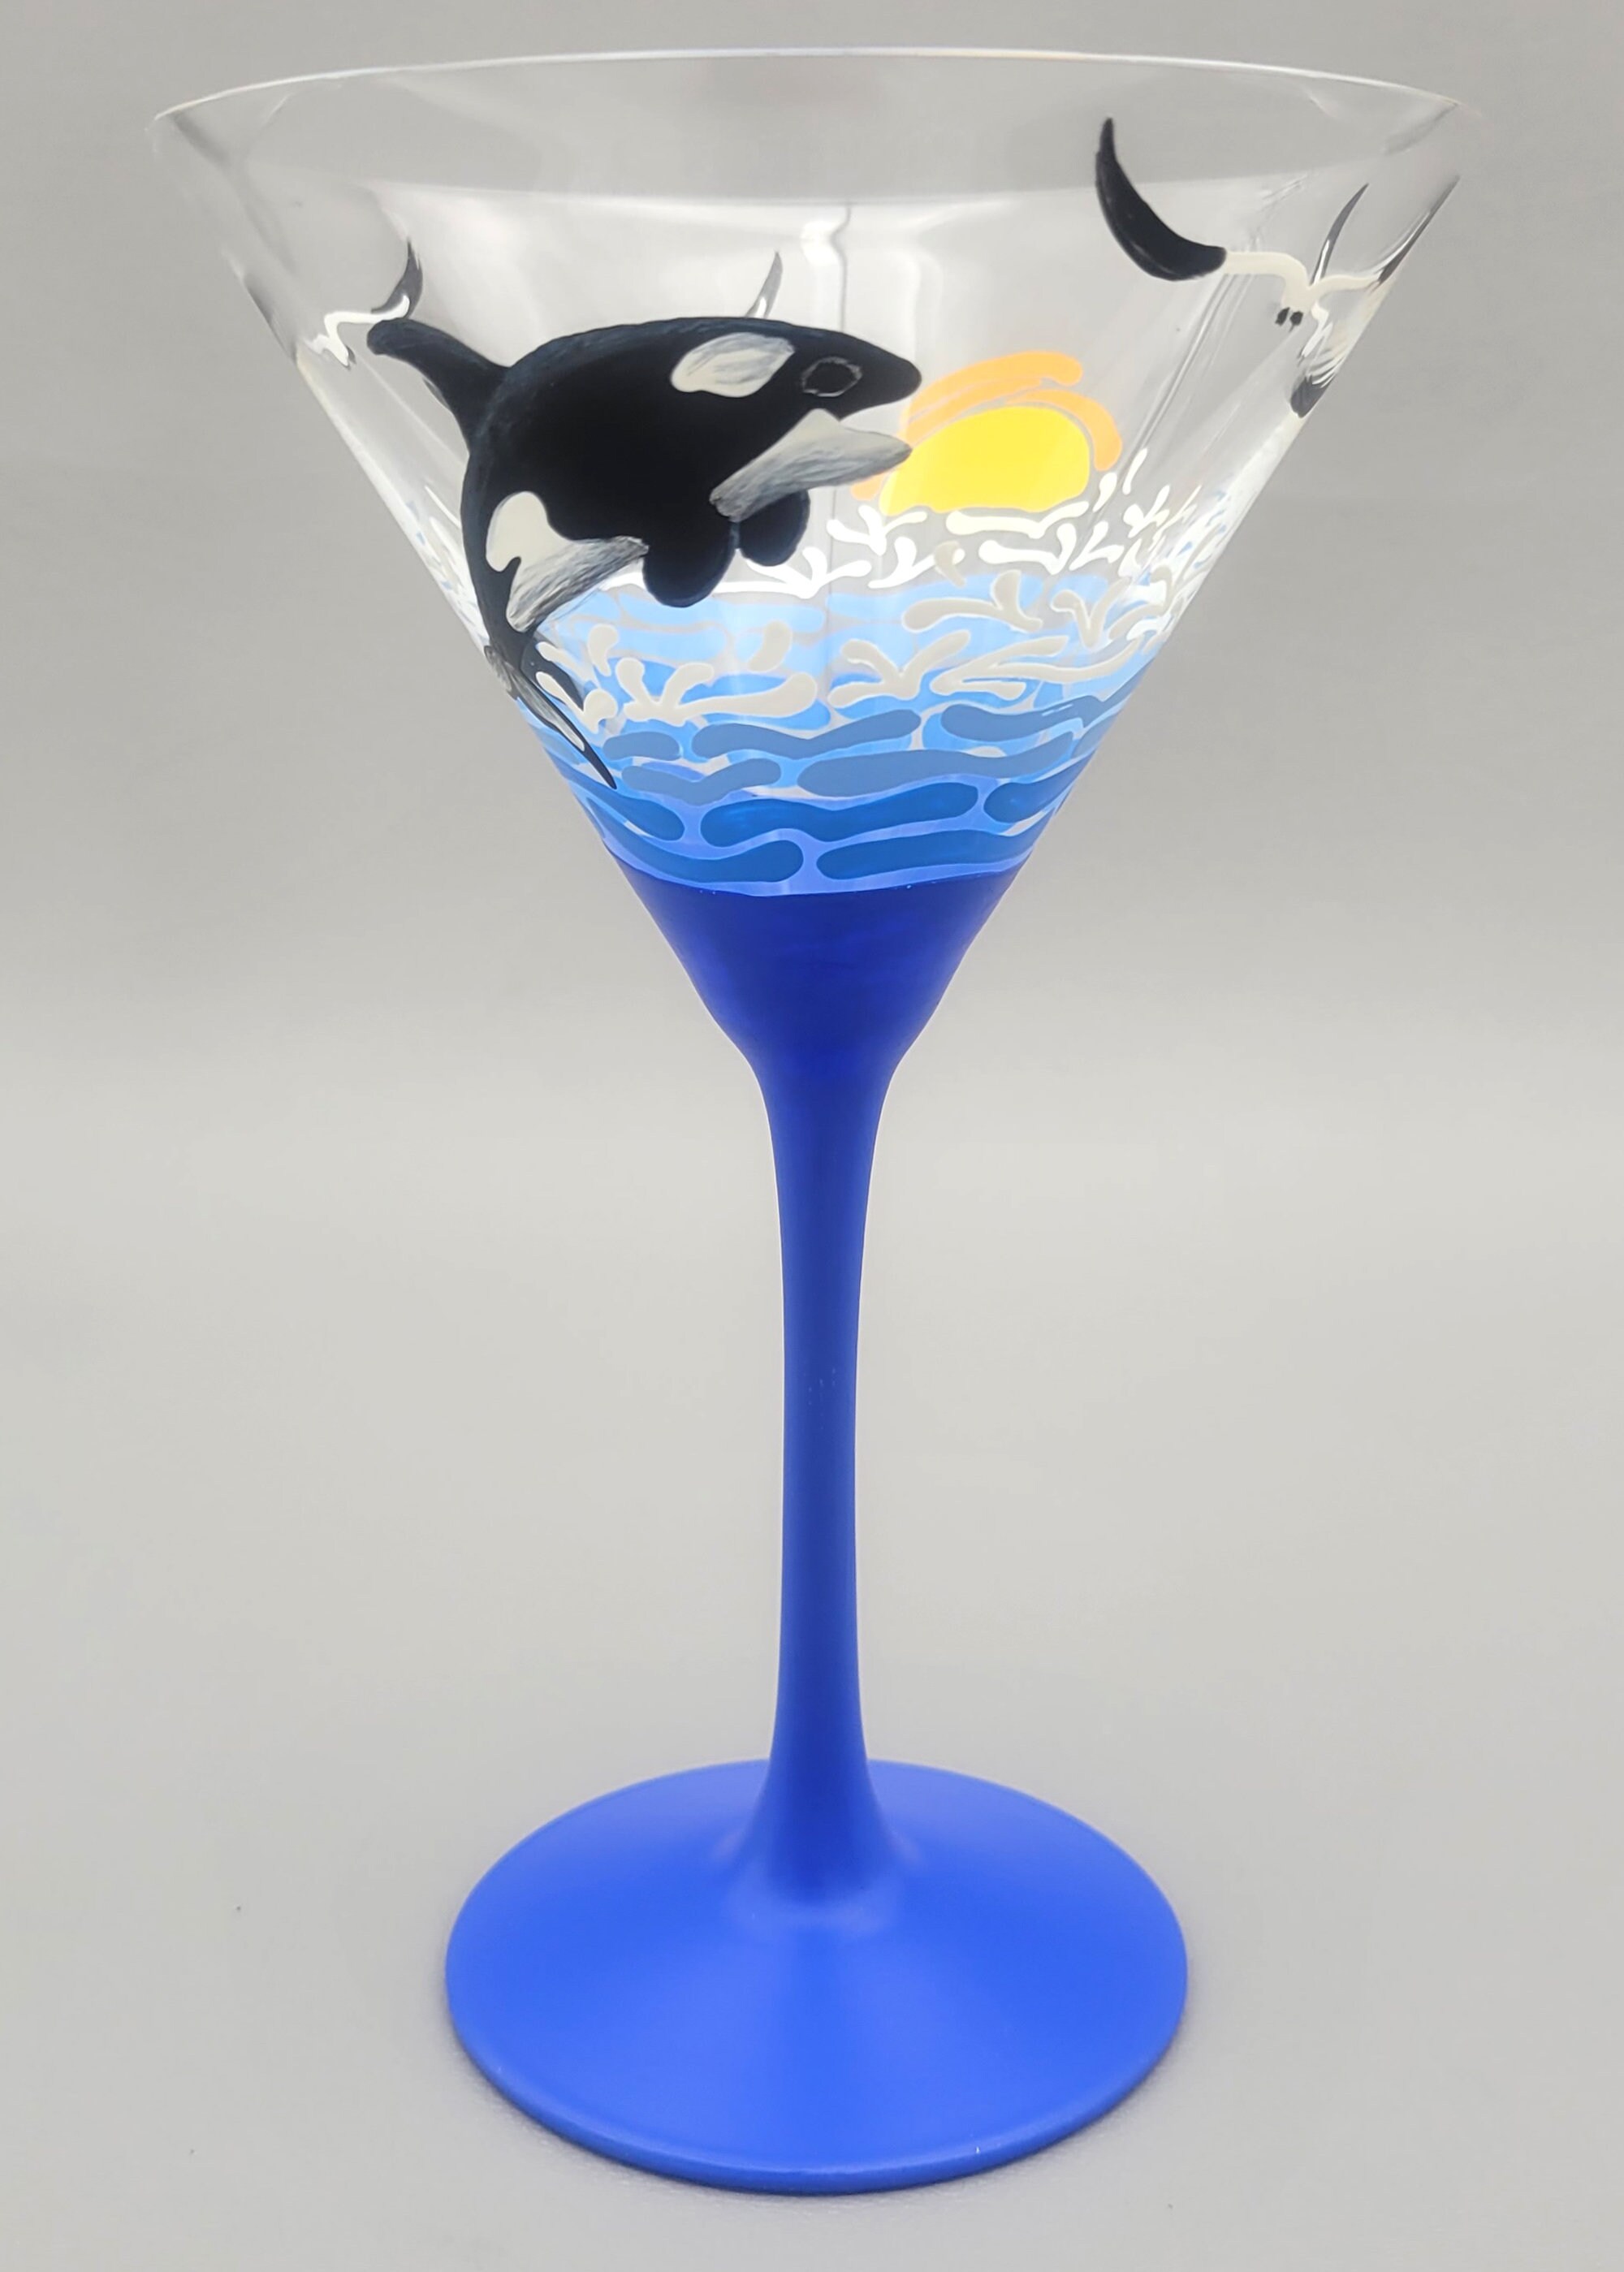 PreOwned Orca, 8OZ, 18/8 Stainless Steel Food Grade Body Chaser Martini  Glass 